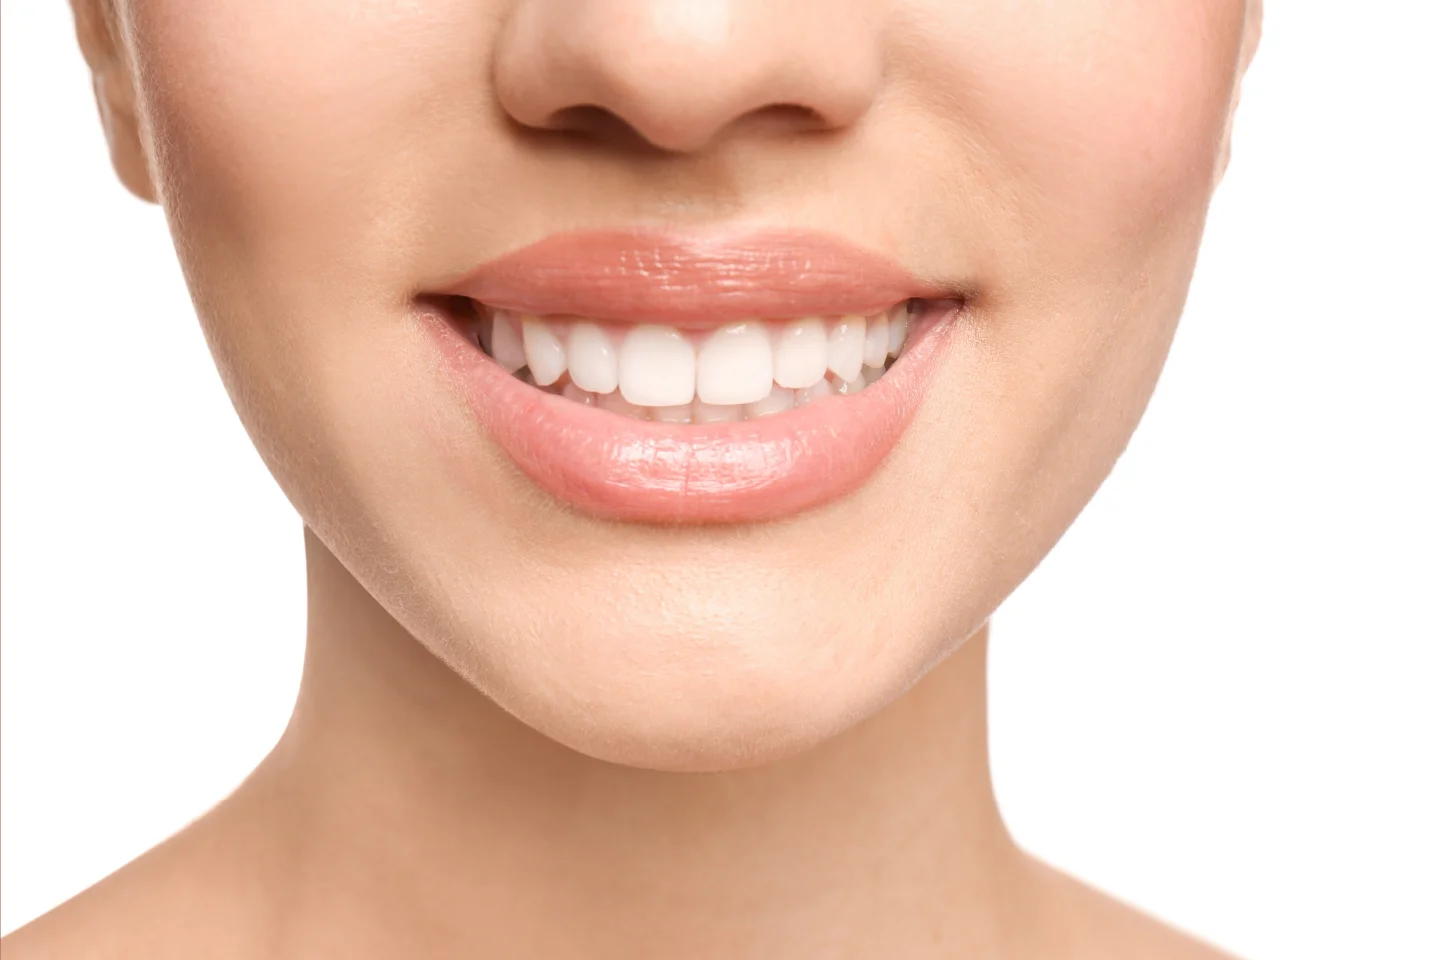 Smile Makeover Treatments for a More Professional Appearance